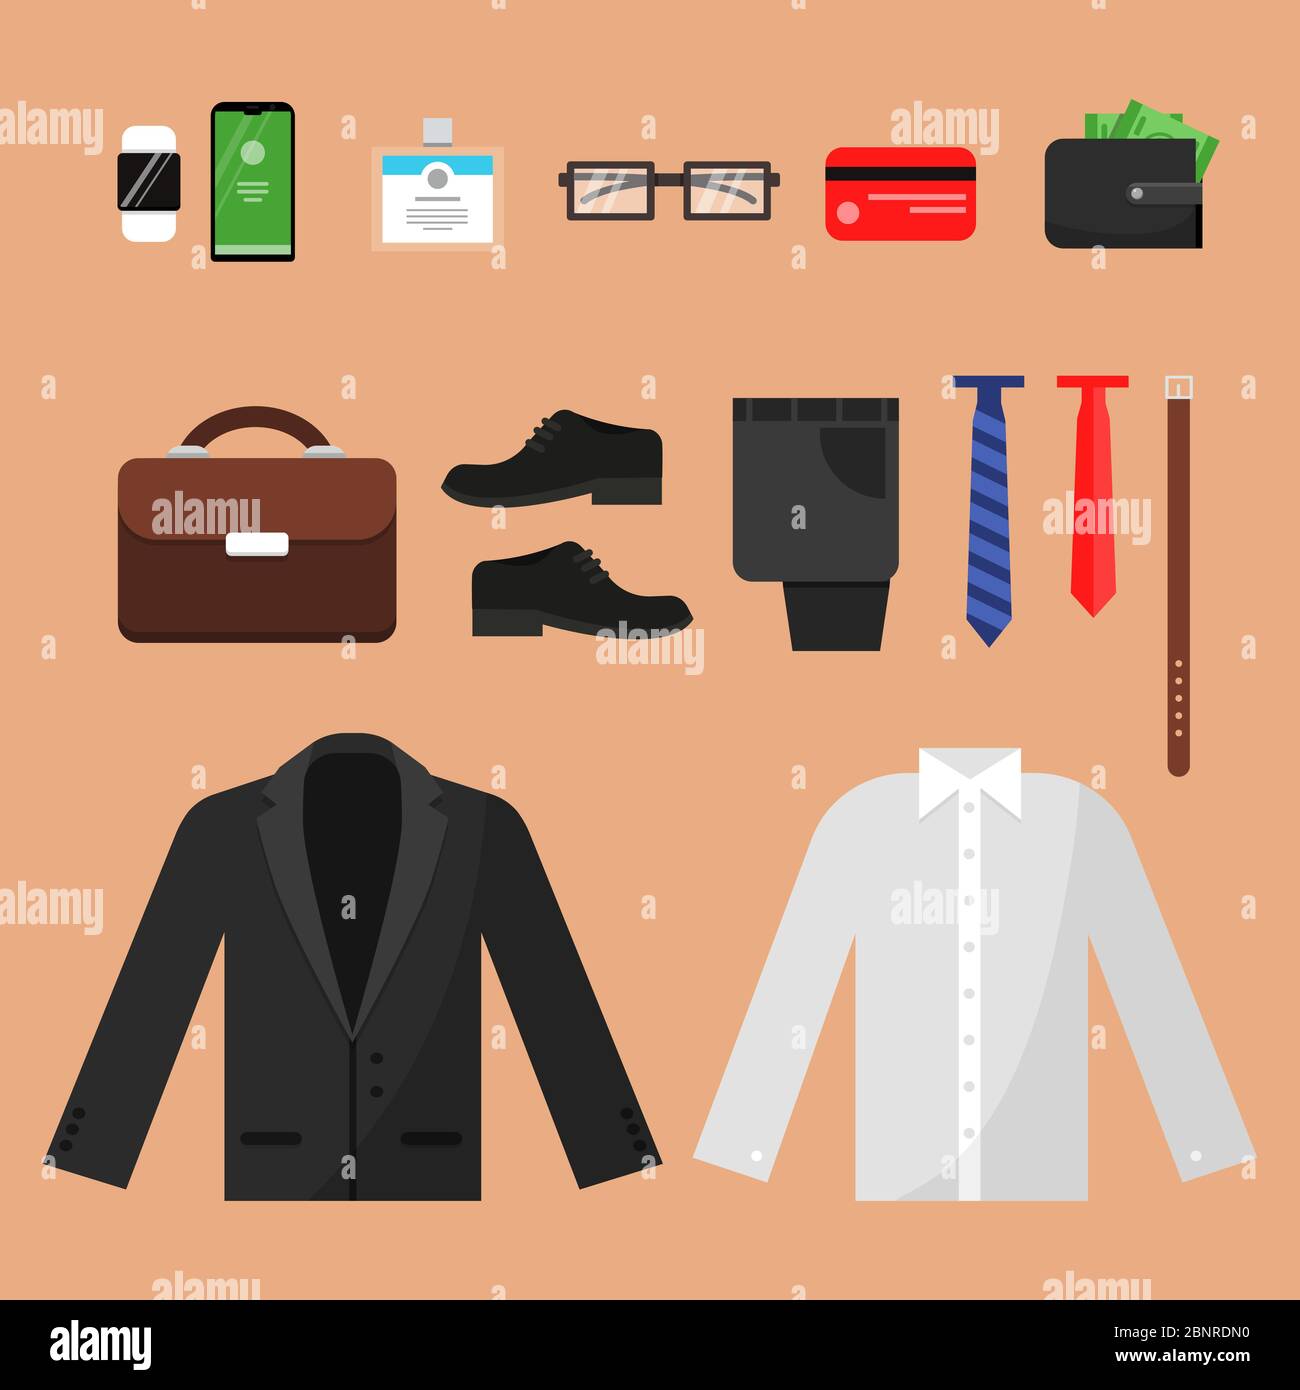 Man accessories in business style, gadgets, clothes, shoes